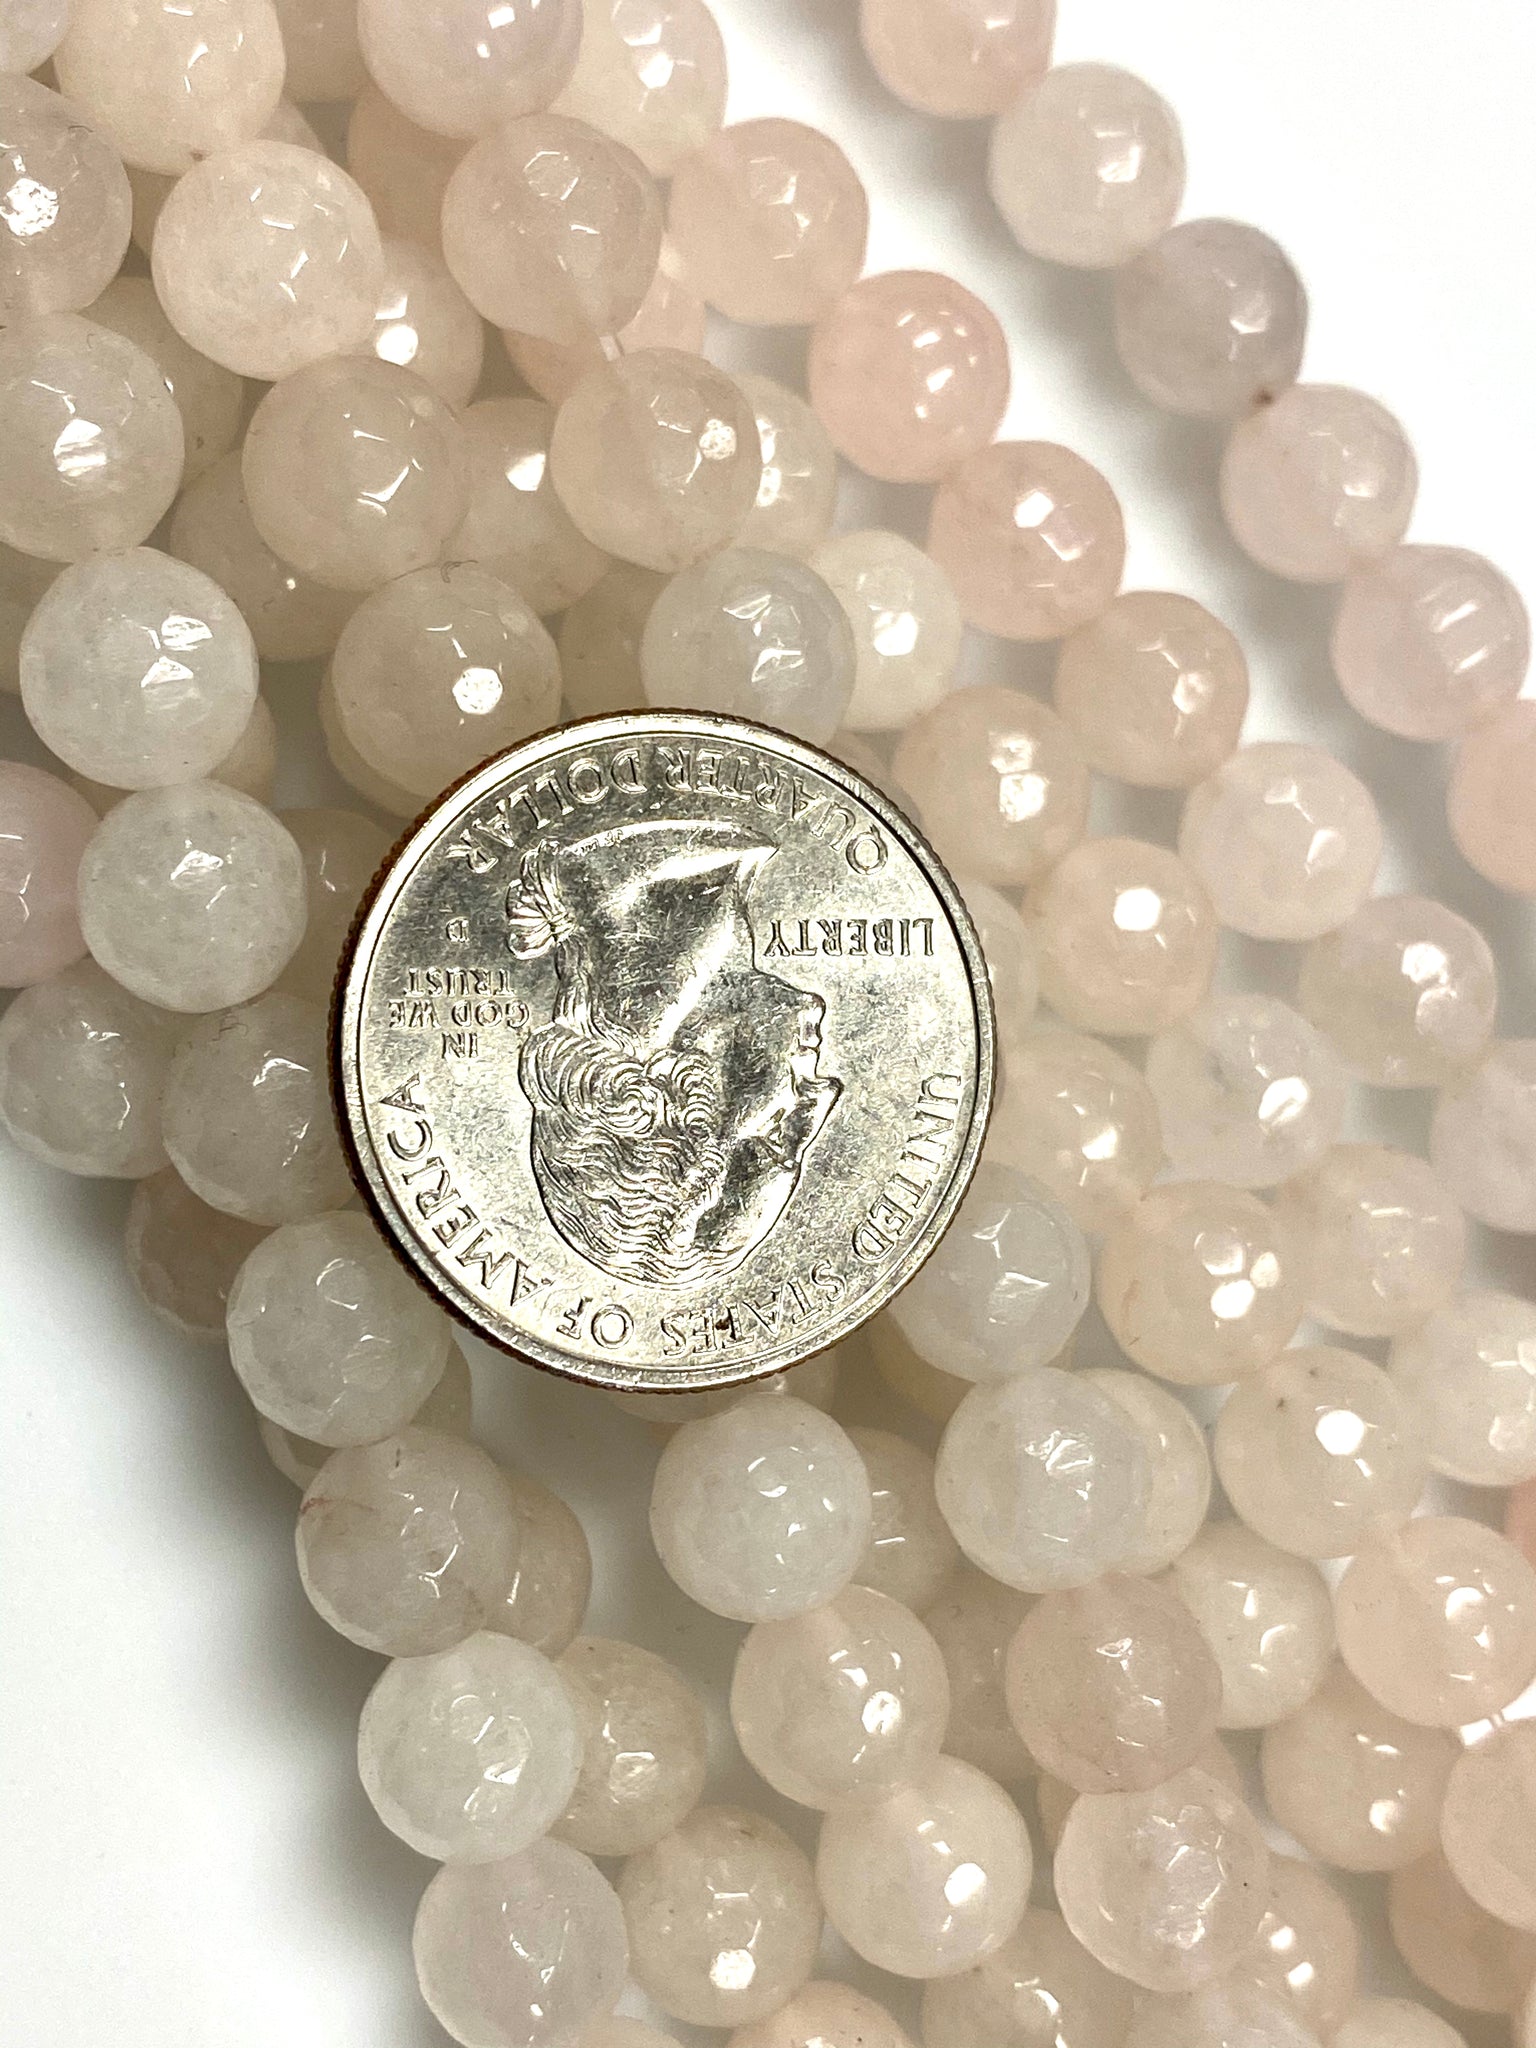 Natural Rose Quartz Beads / Faceted Round Shape Beads / Healing Energy Stone Beads / 8mm 2 Strands Beads